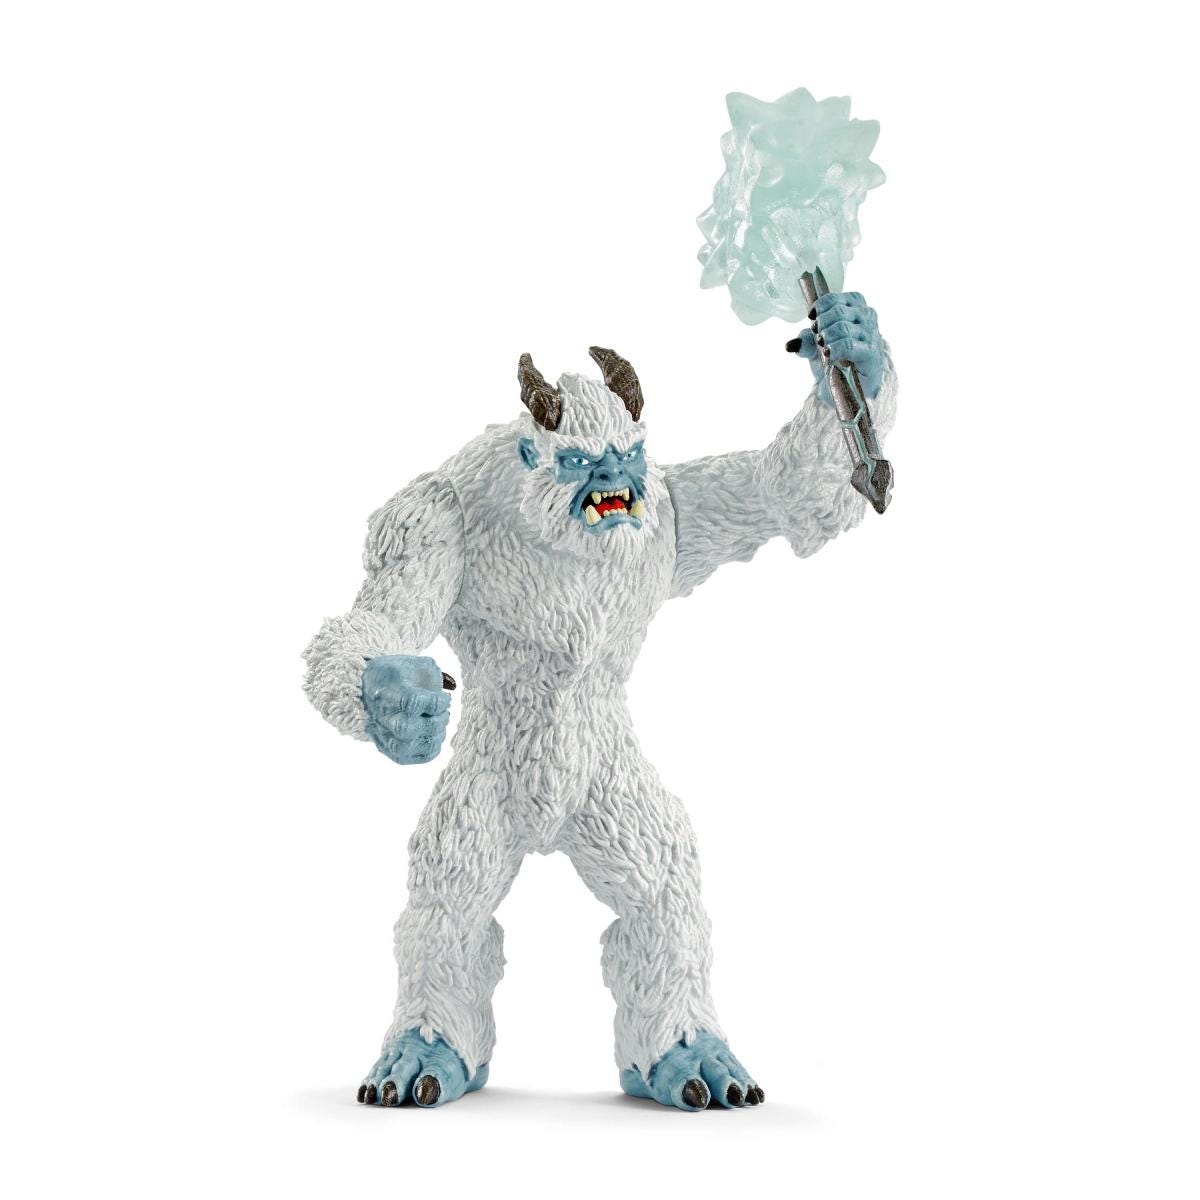 Ice monster with weapon